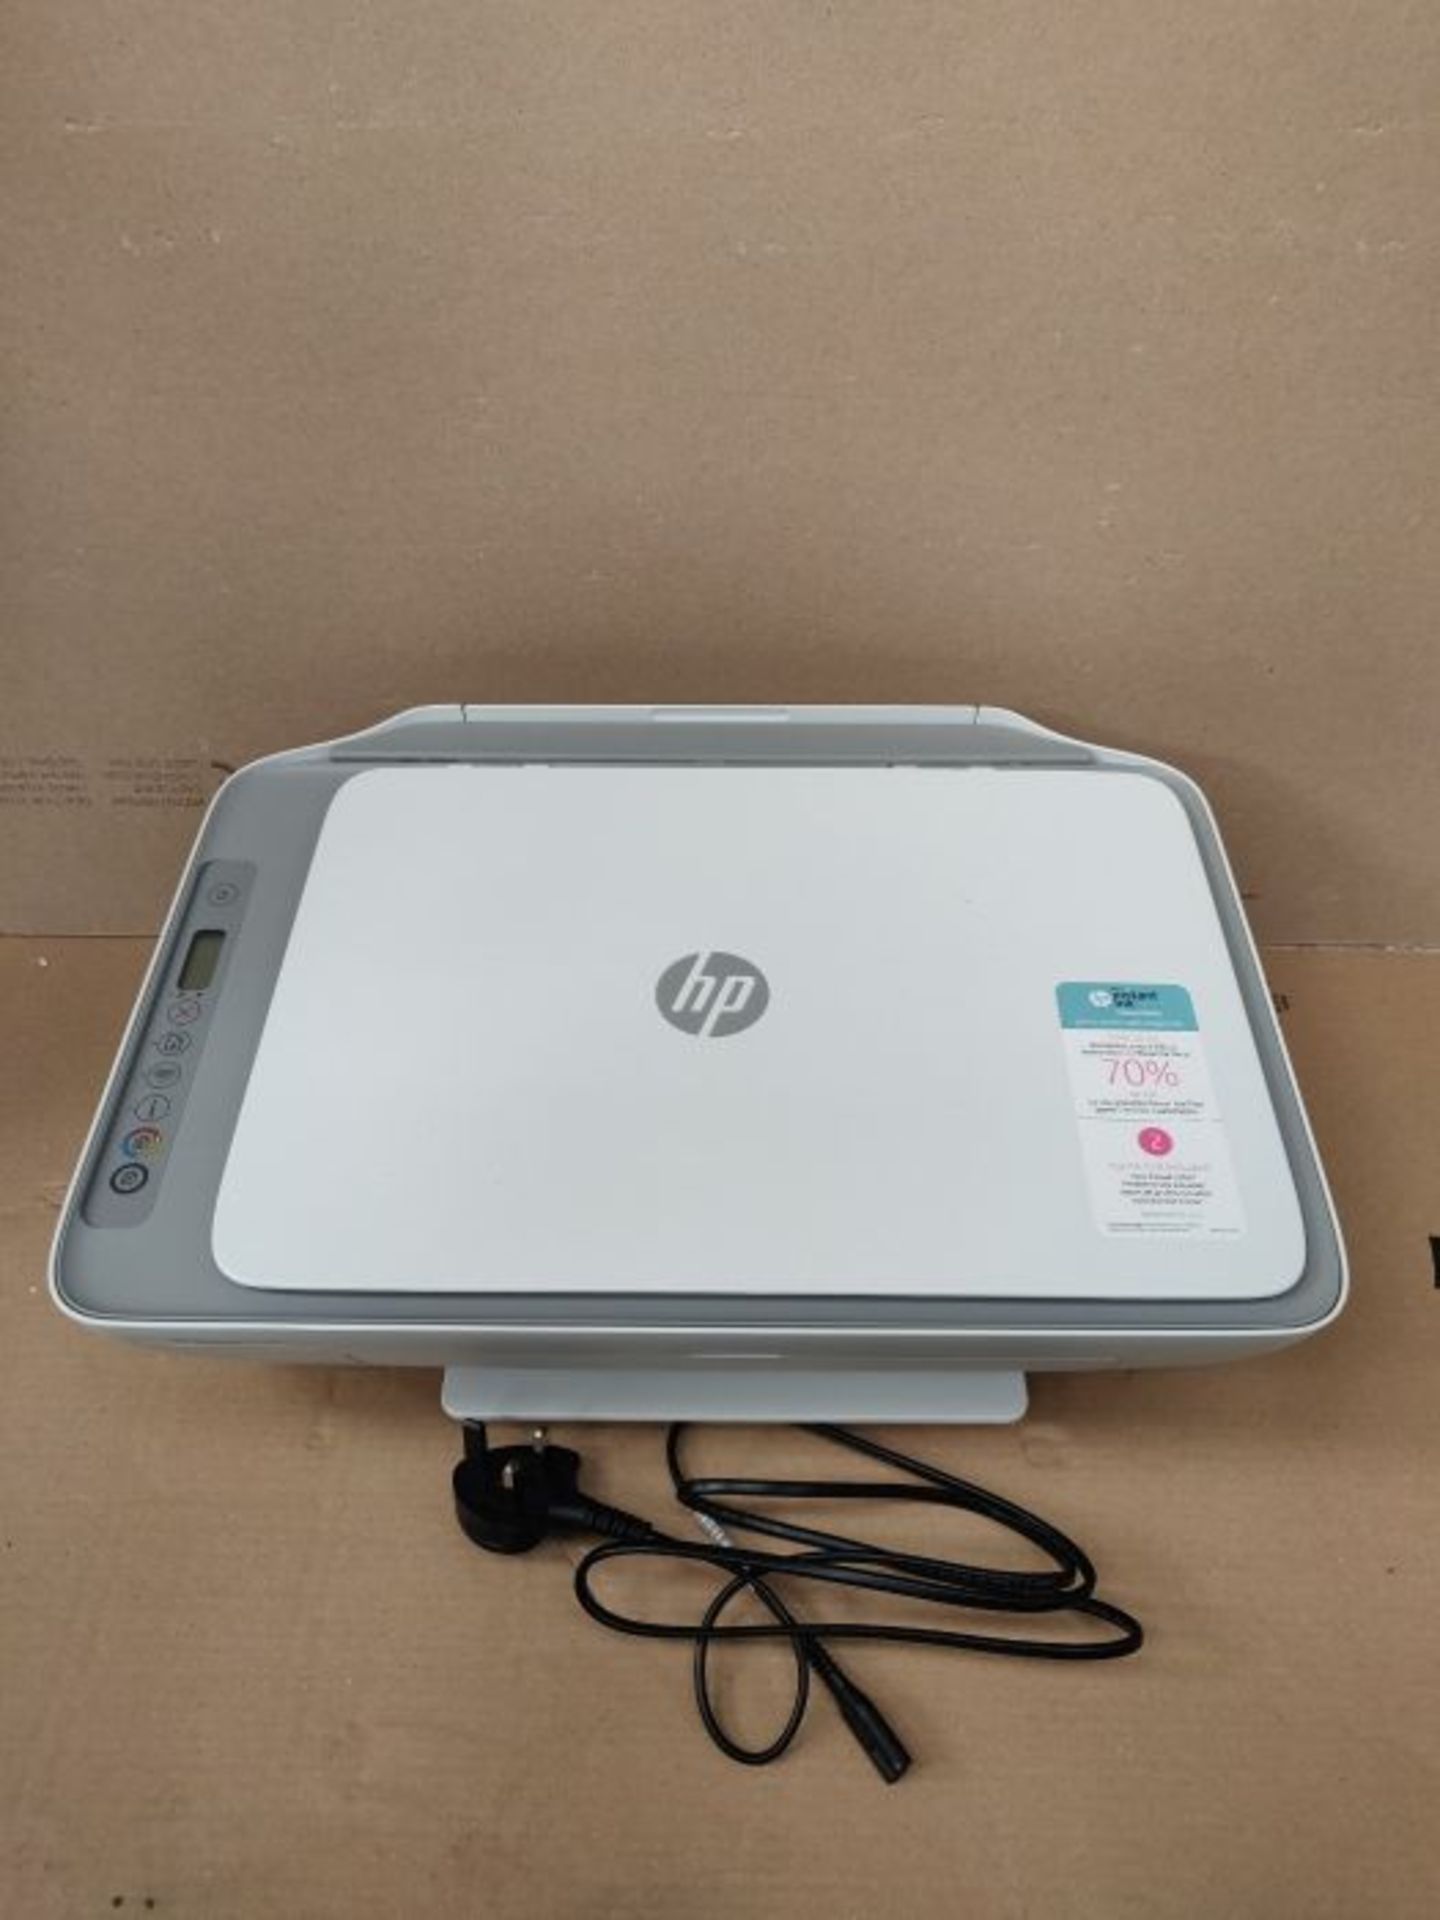 HP DeskJet 2720 All-in-One Printer with Wireless Printing, Instant Ink with 2 Months T - Image 3 of 3